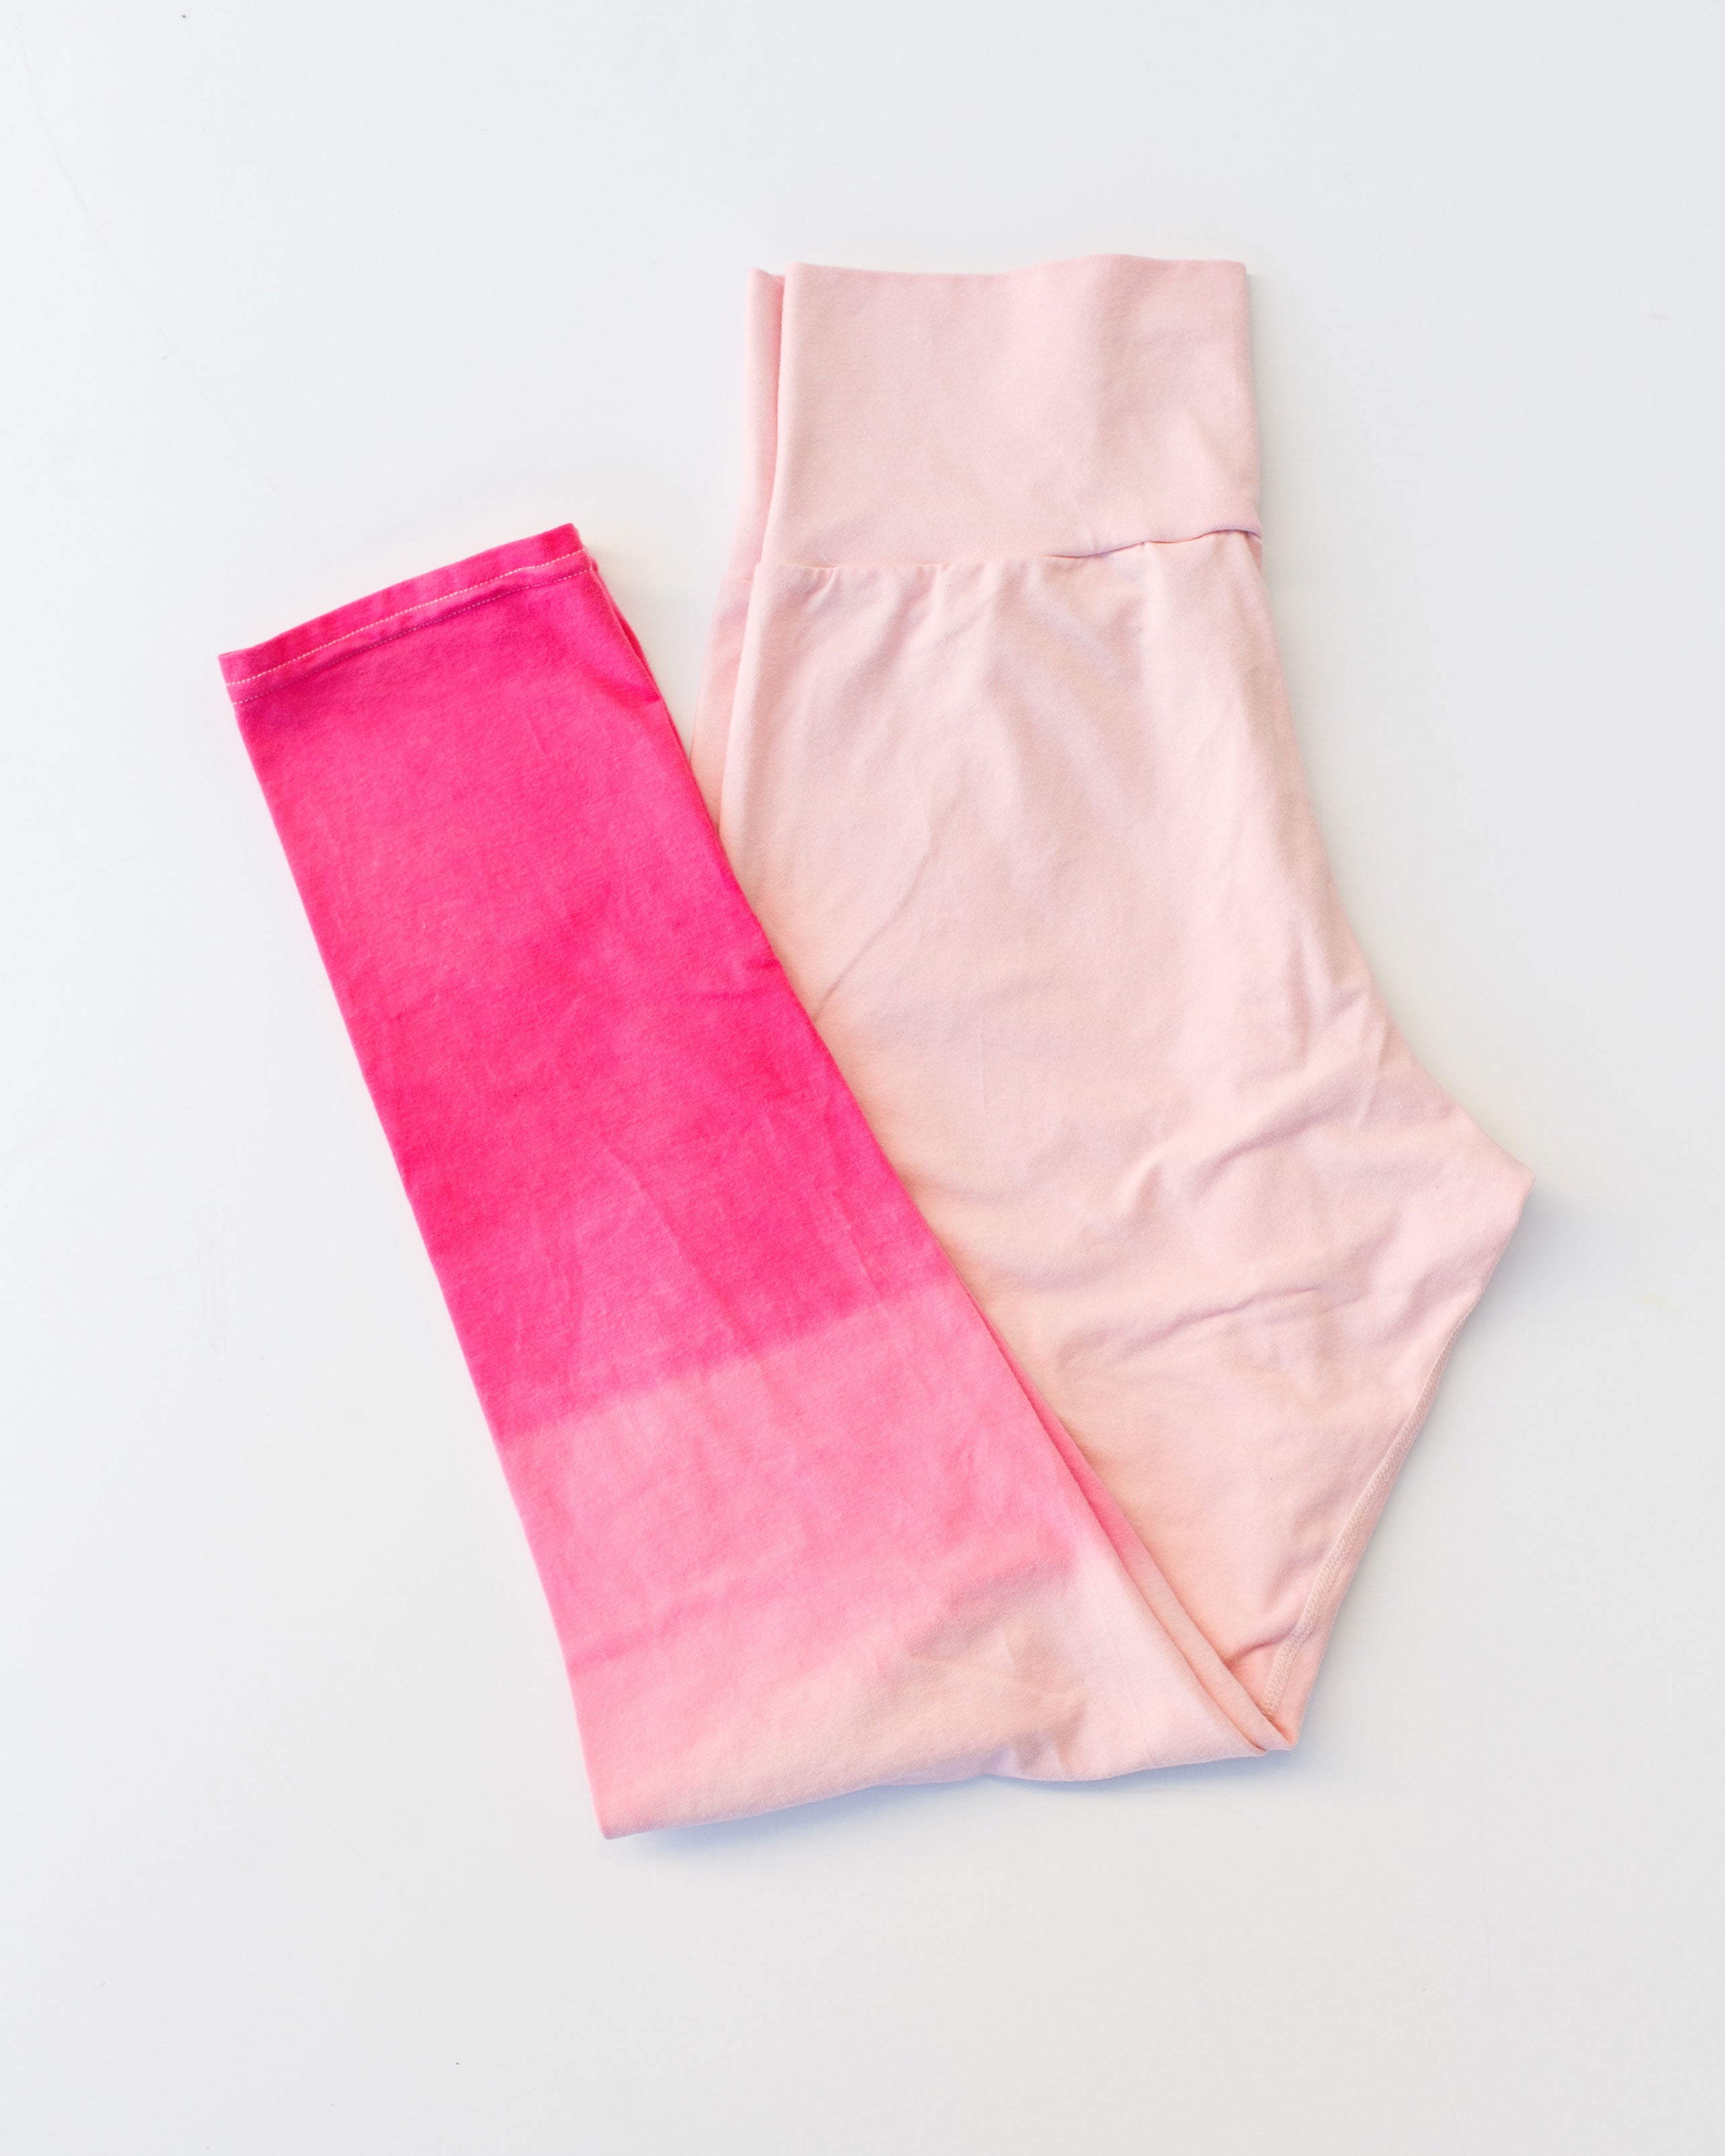 Flat lay of Thunderpants organic cotton Leggings in Valentine's Day Dip Dye ombre pinks.